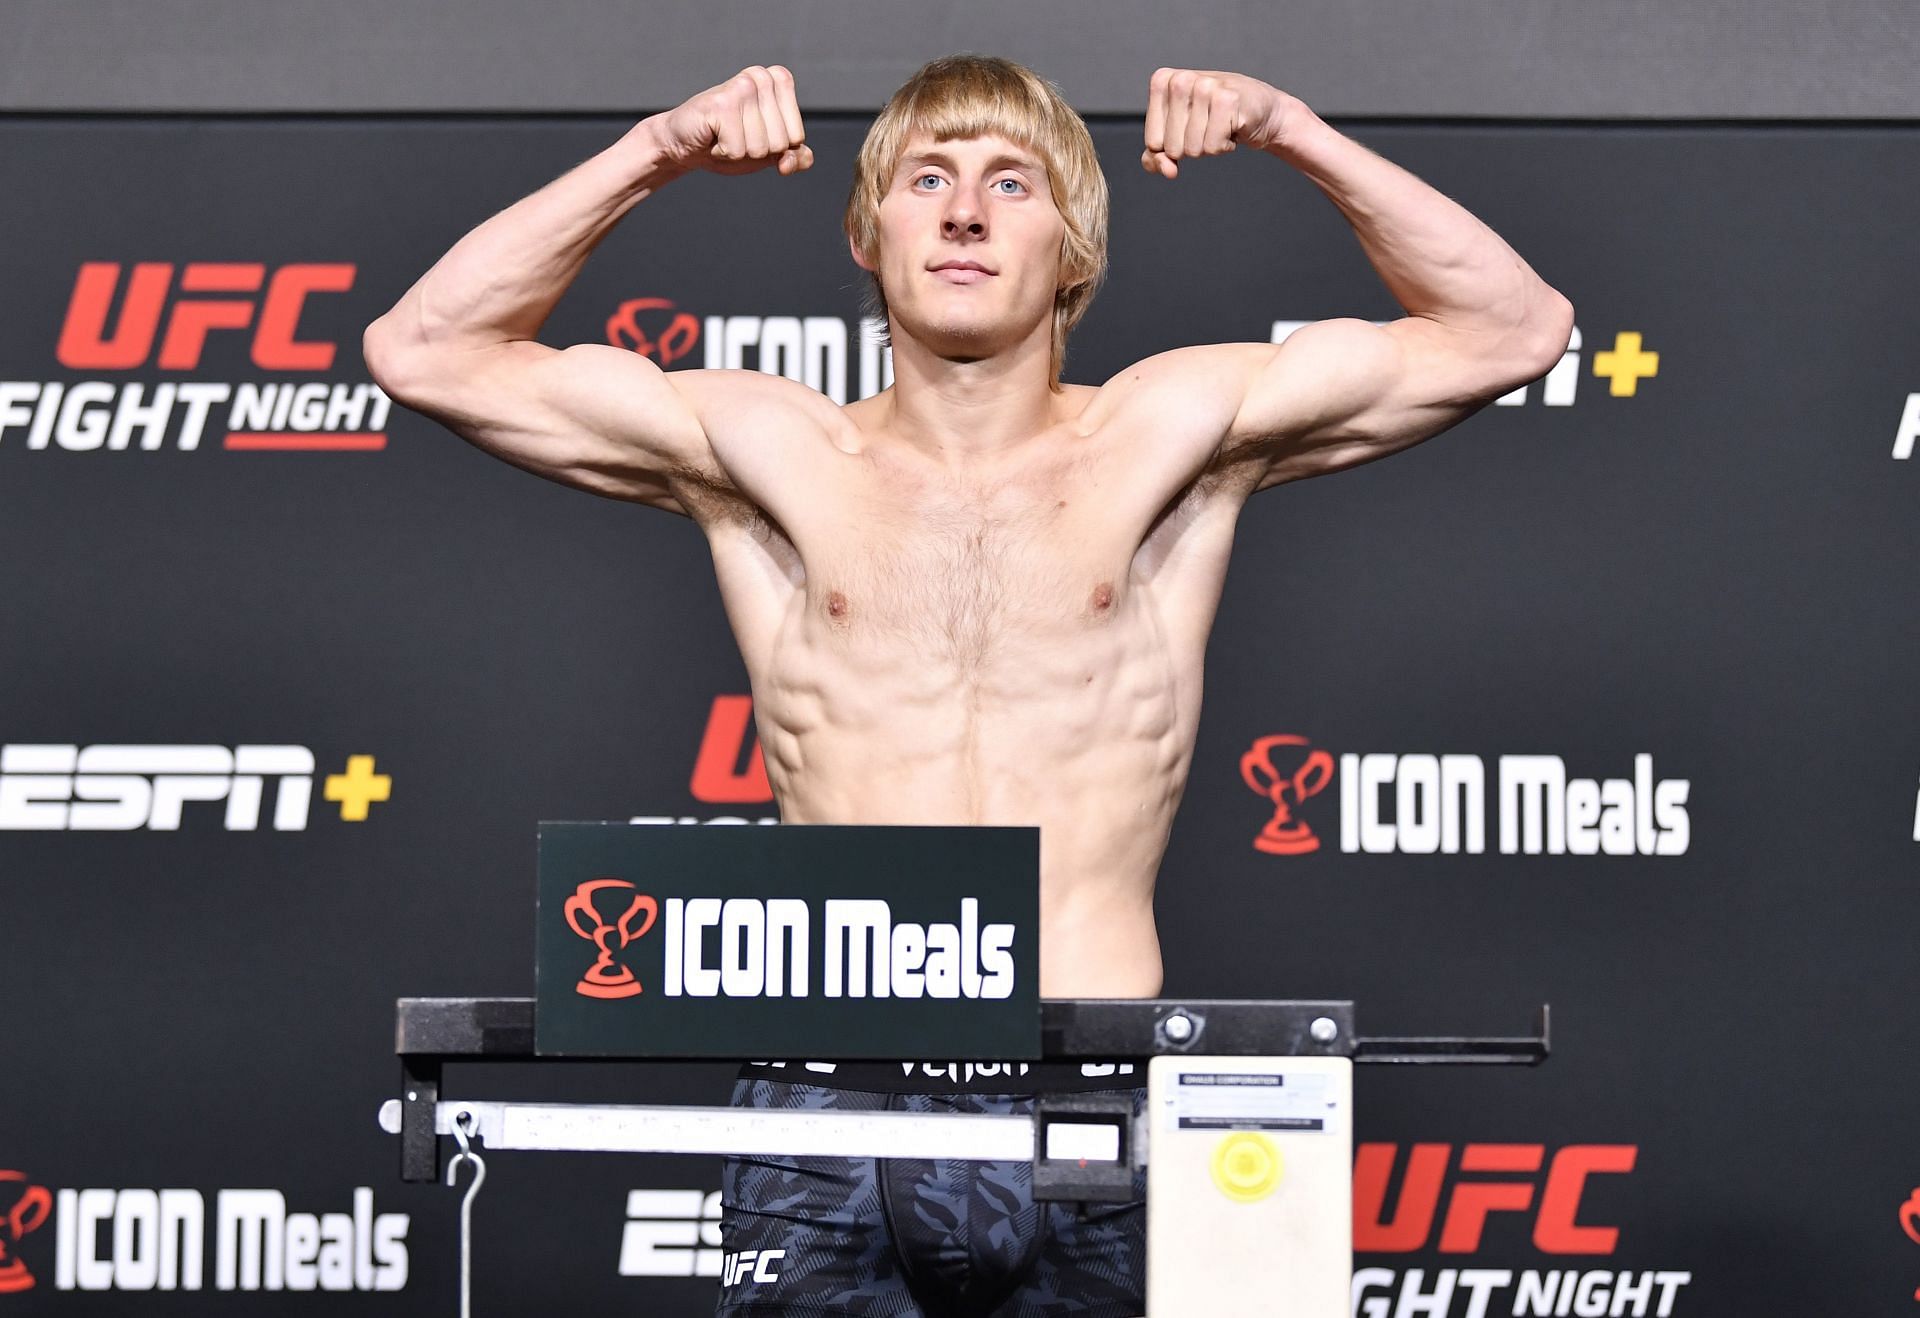 UFC Fight Night: Brunson vs. Till Weigh-in: Paddy Pimblett on the scales (Image courtesy of Getty)